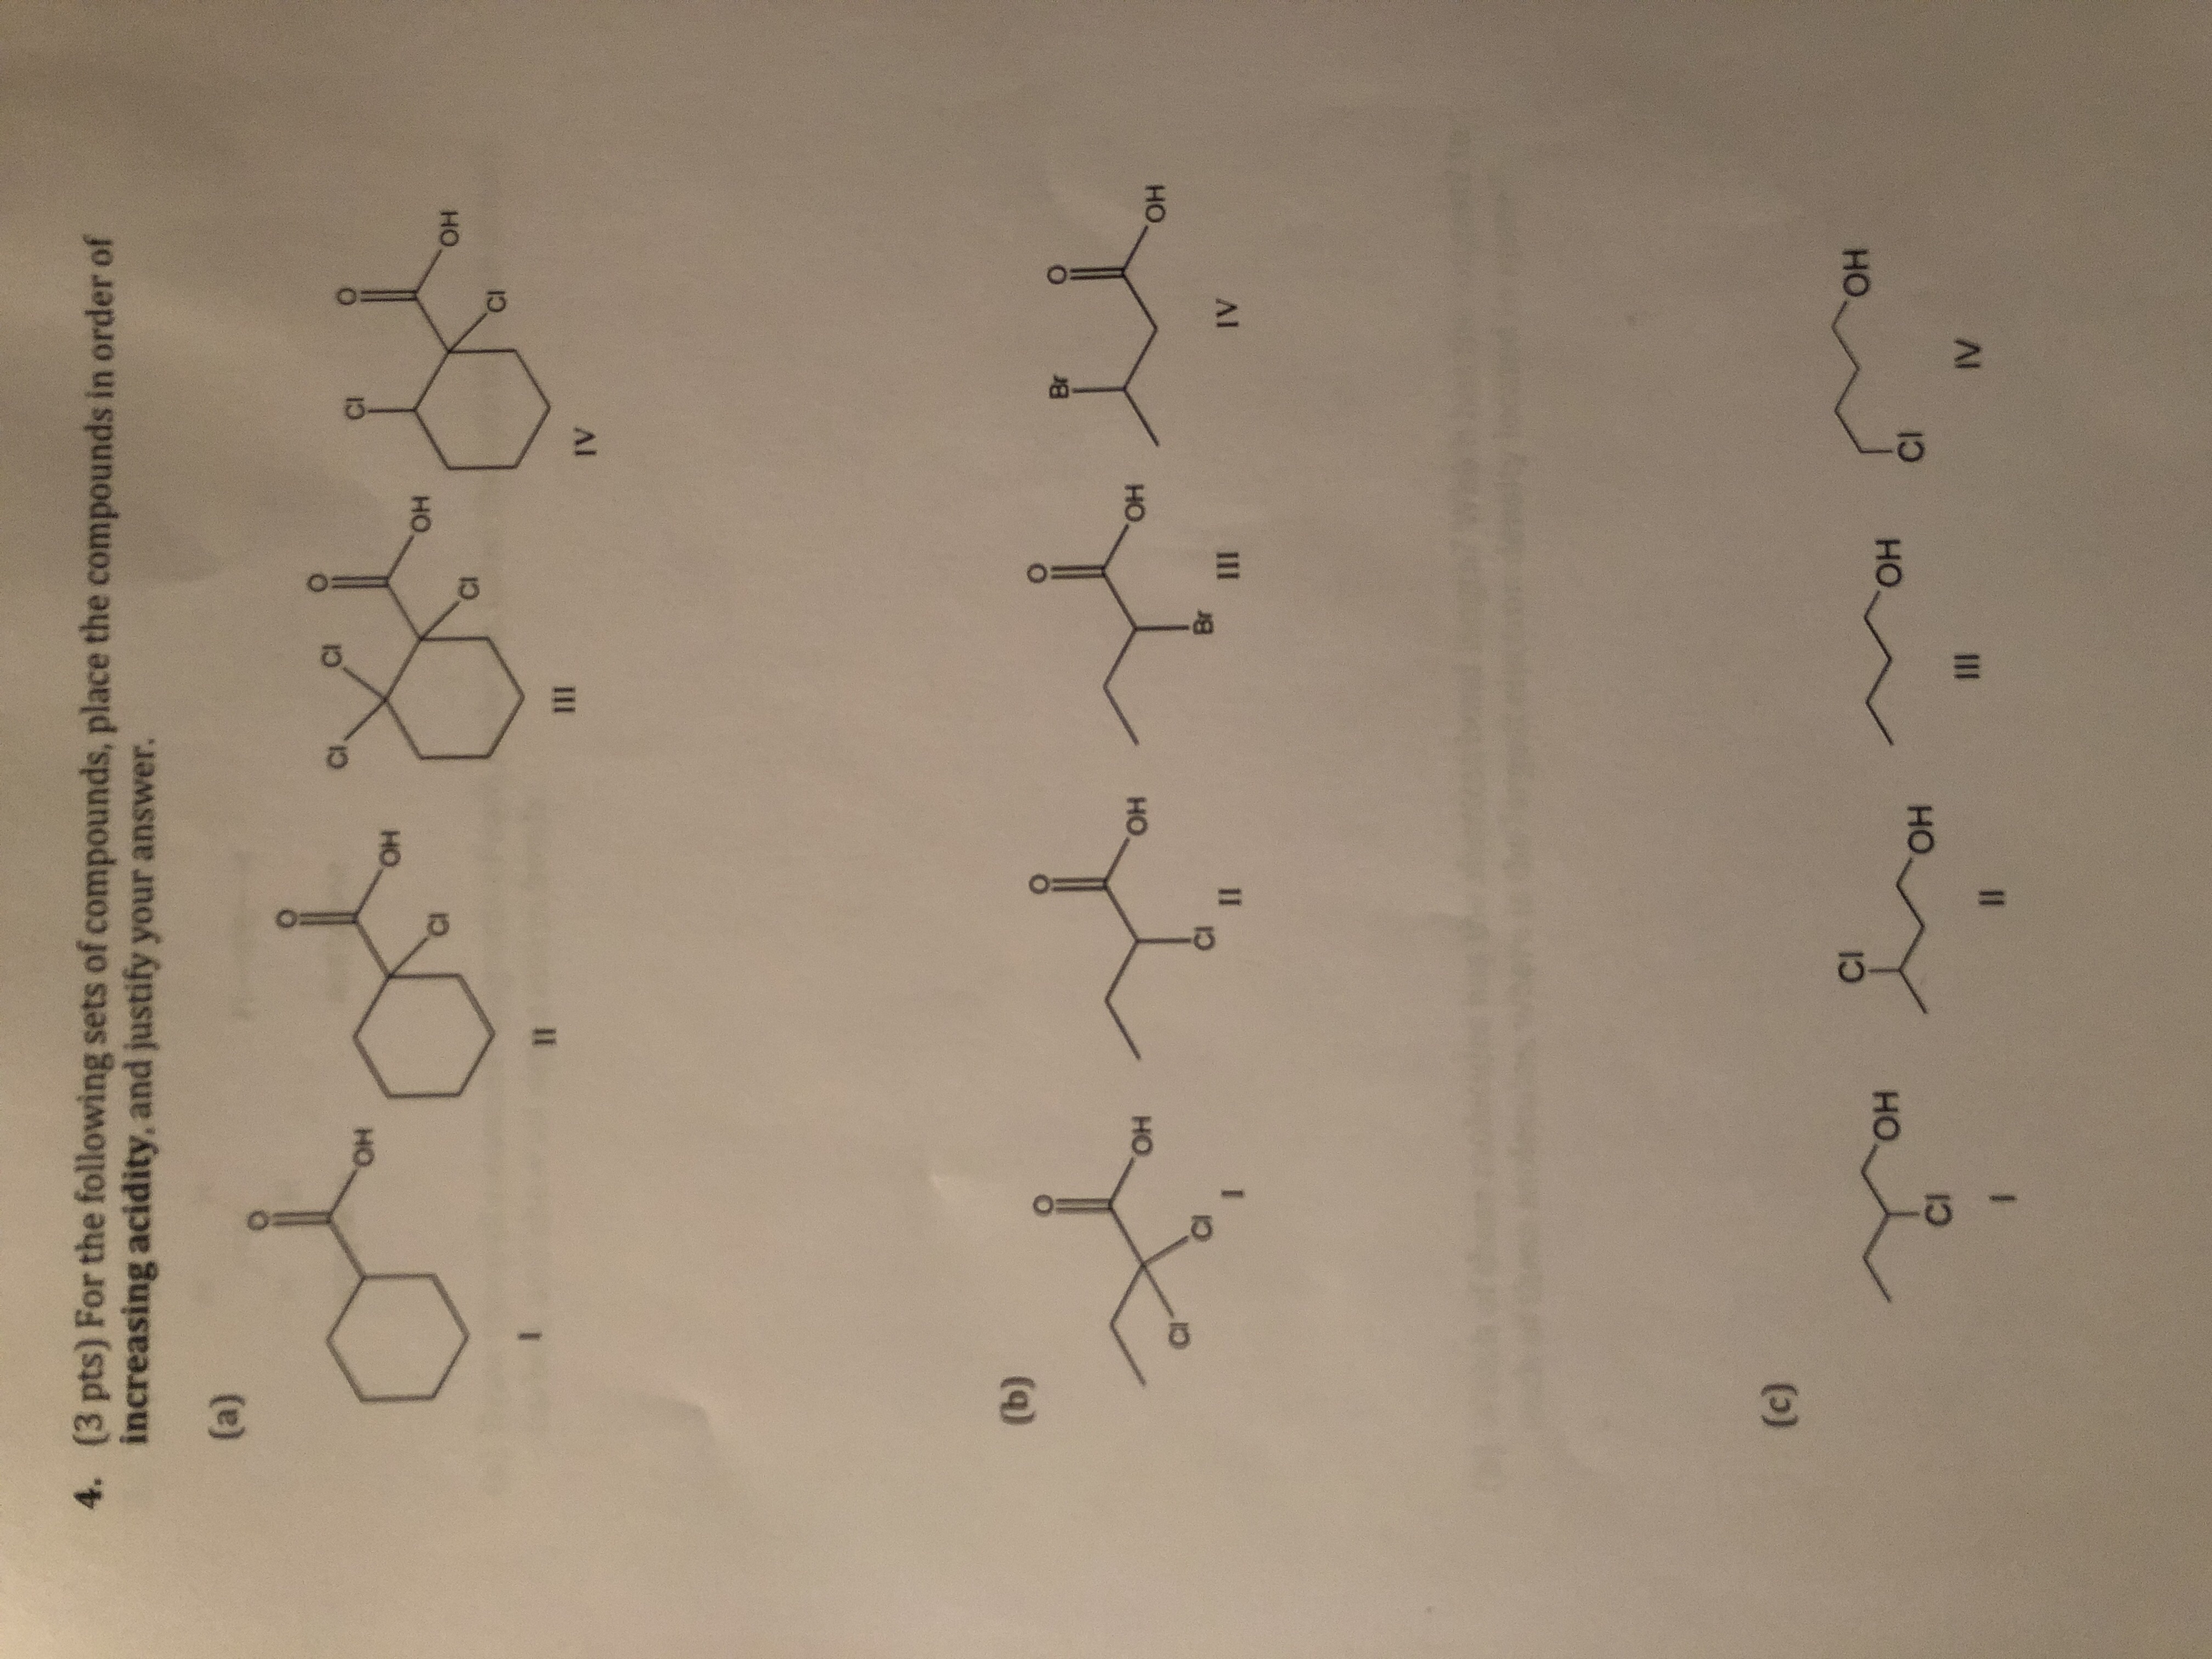 (3 pts) For the following sets of compounds, place the compounds in order of
increasing acidity, and justify your answer
4.
Cl
он
Cl
он
он
он
IV
он
он
он
он
Cil
Ci
IV
Cl
он
он
он
Ci
